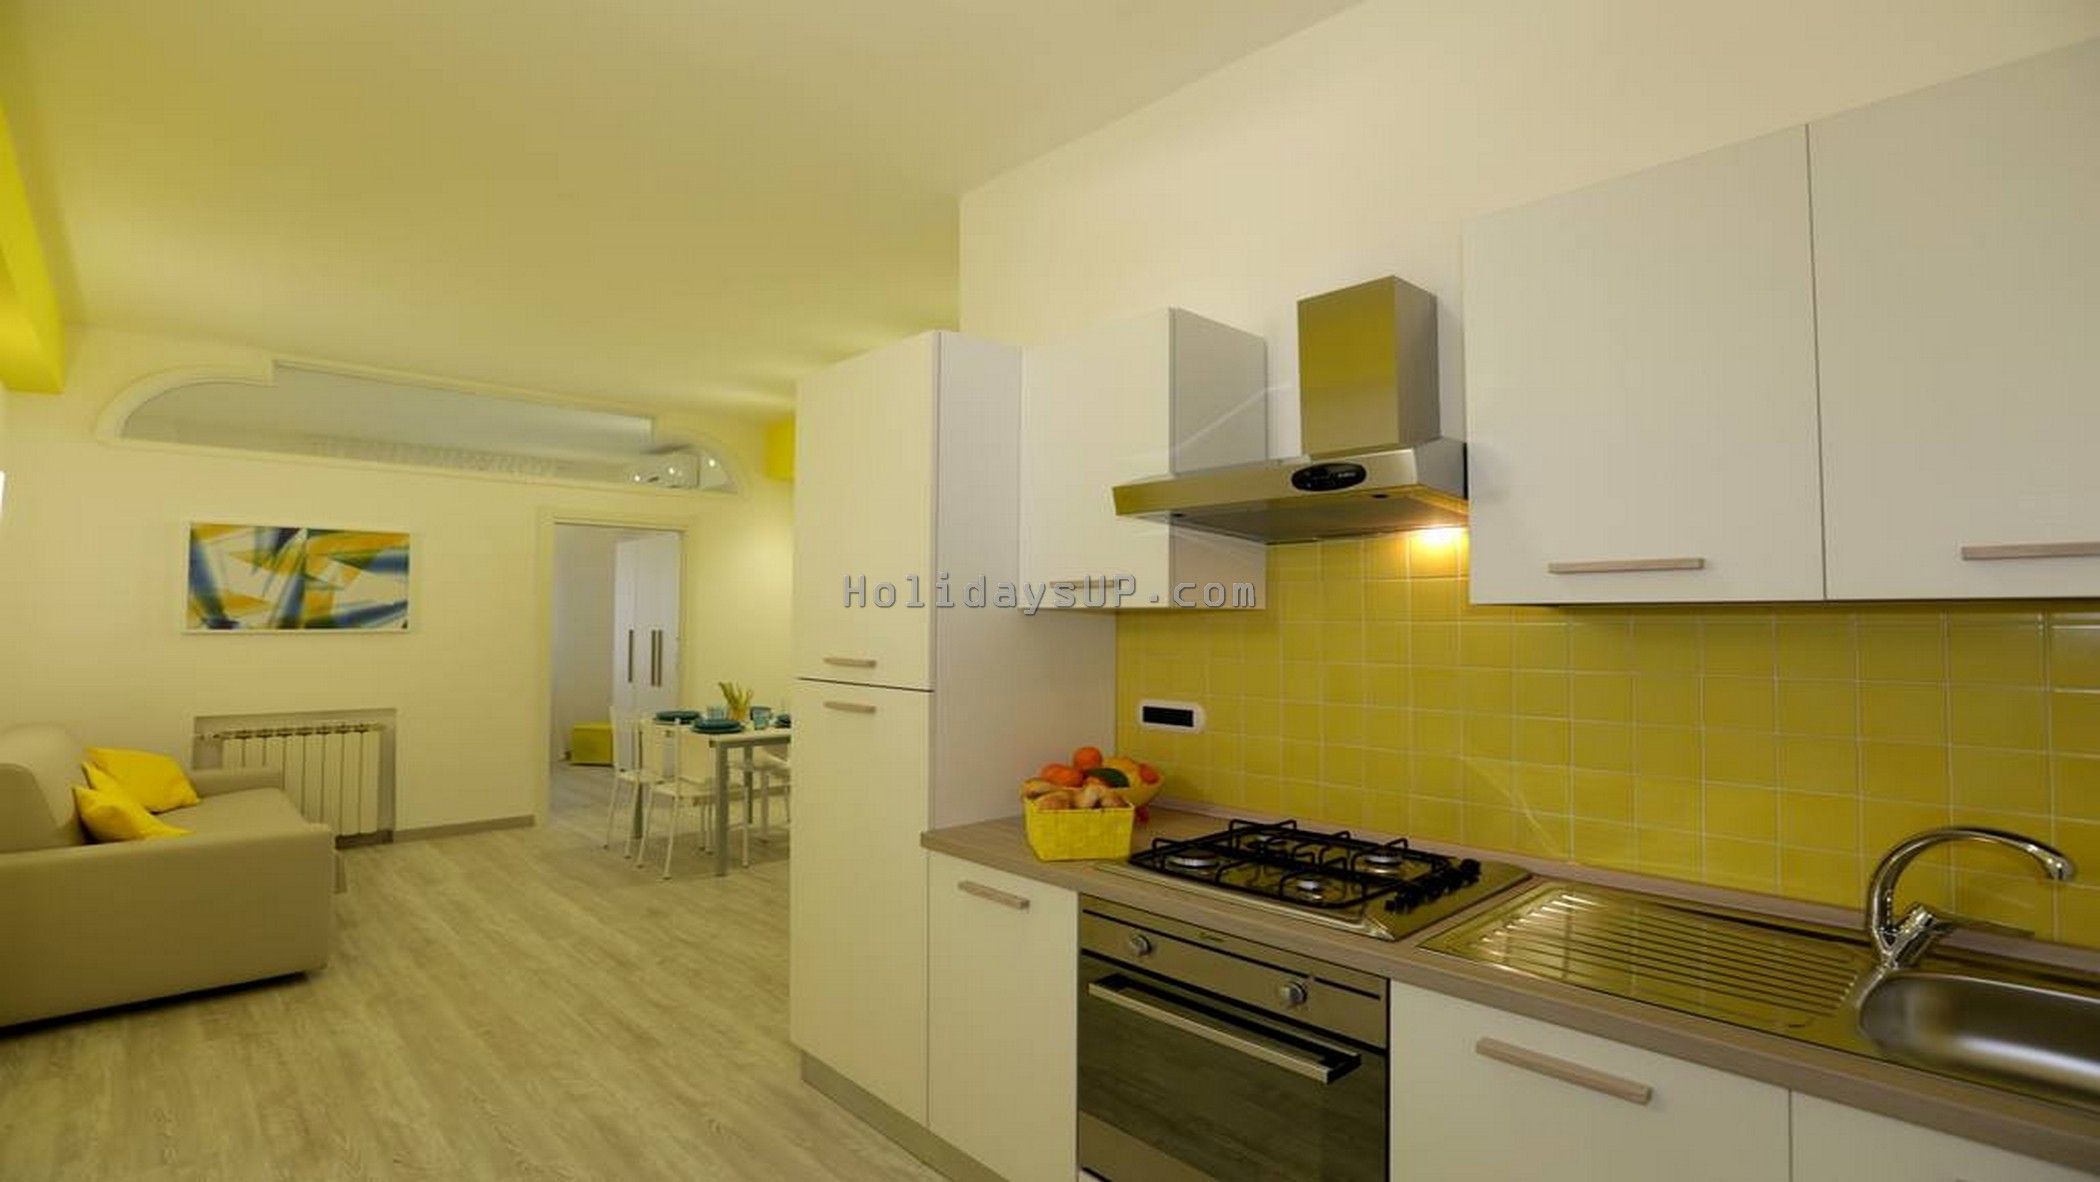 Living area and kitchen side apartment casa mariandre b booking rentals